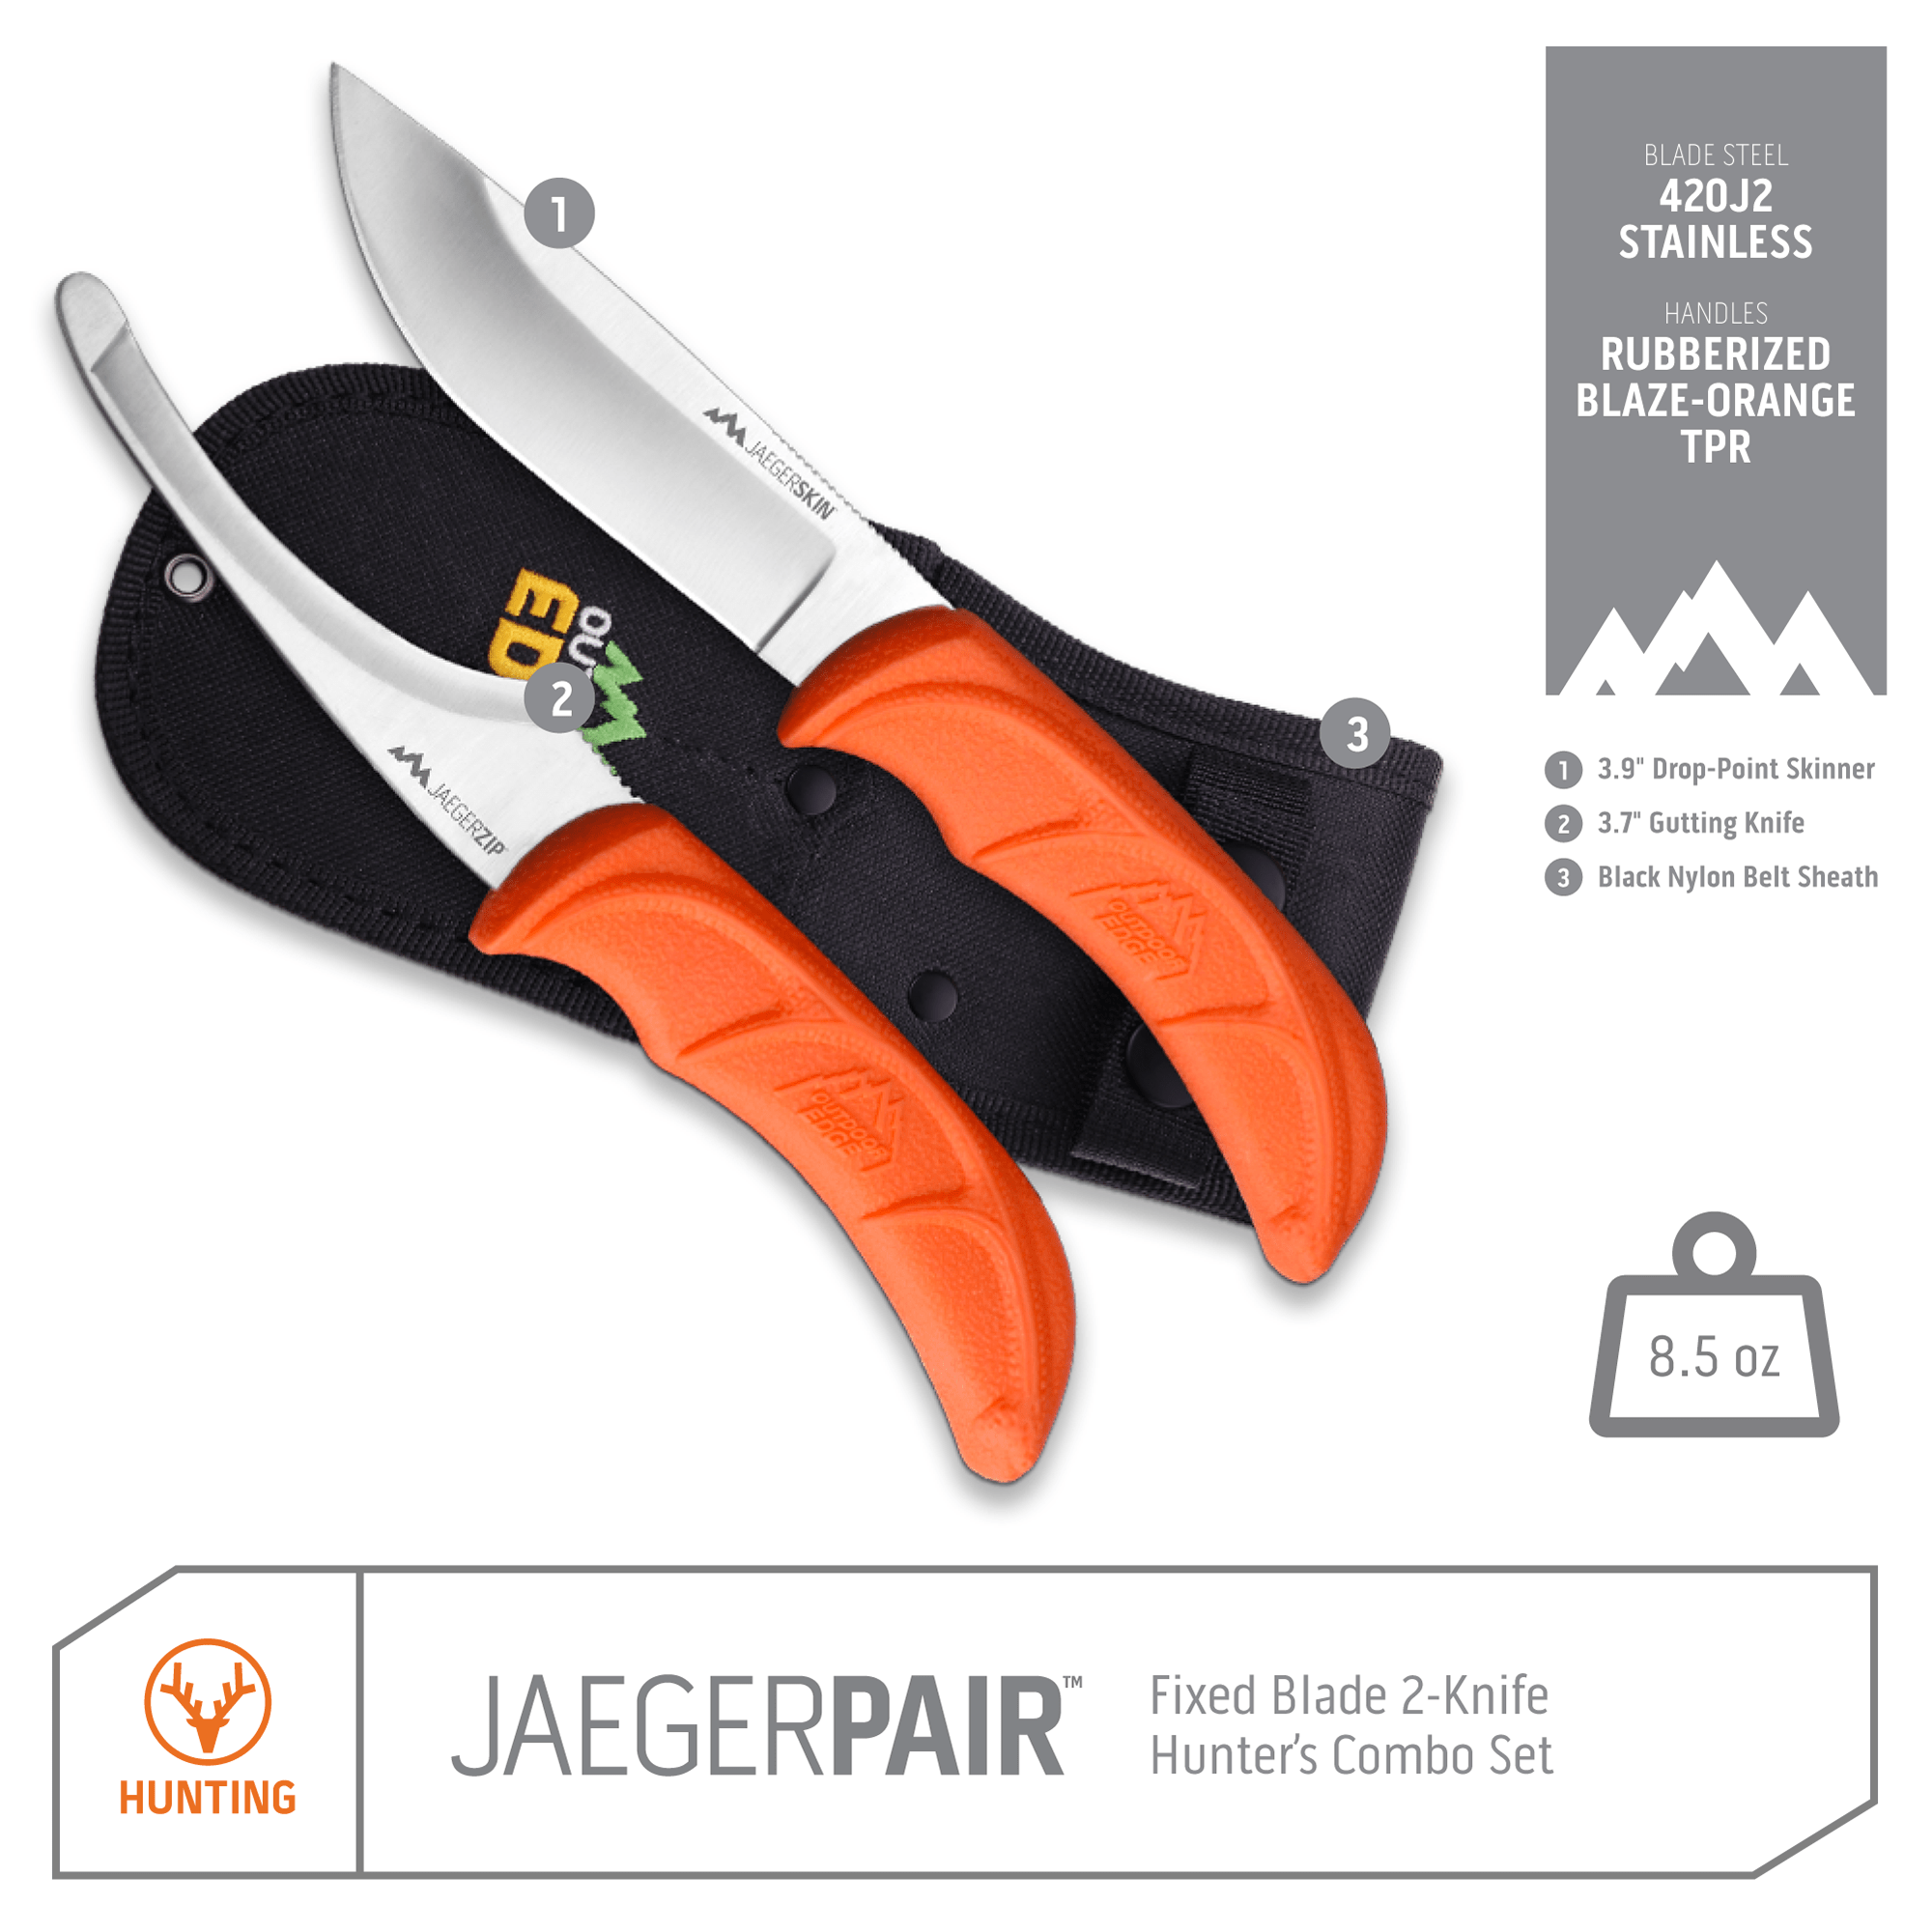 Outdoor Edge JaegerPair Hunting and Field dressing knife product photo with callouts for Drop-Point Skinner, Gutting Knife, and Sheath.